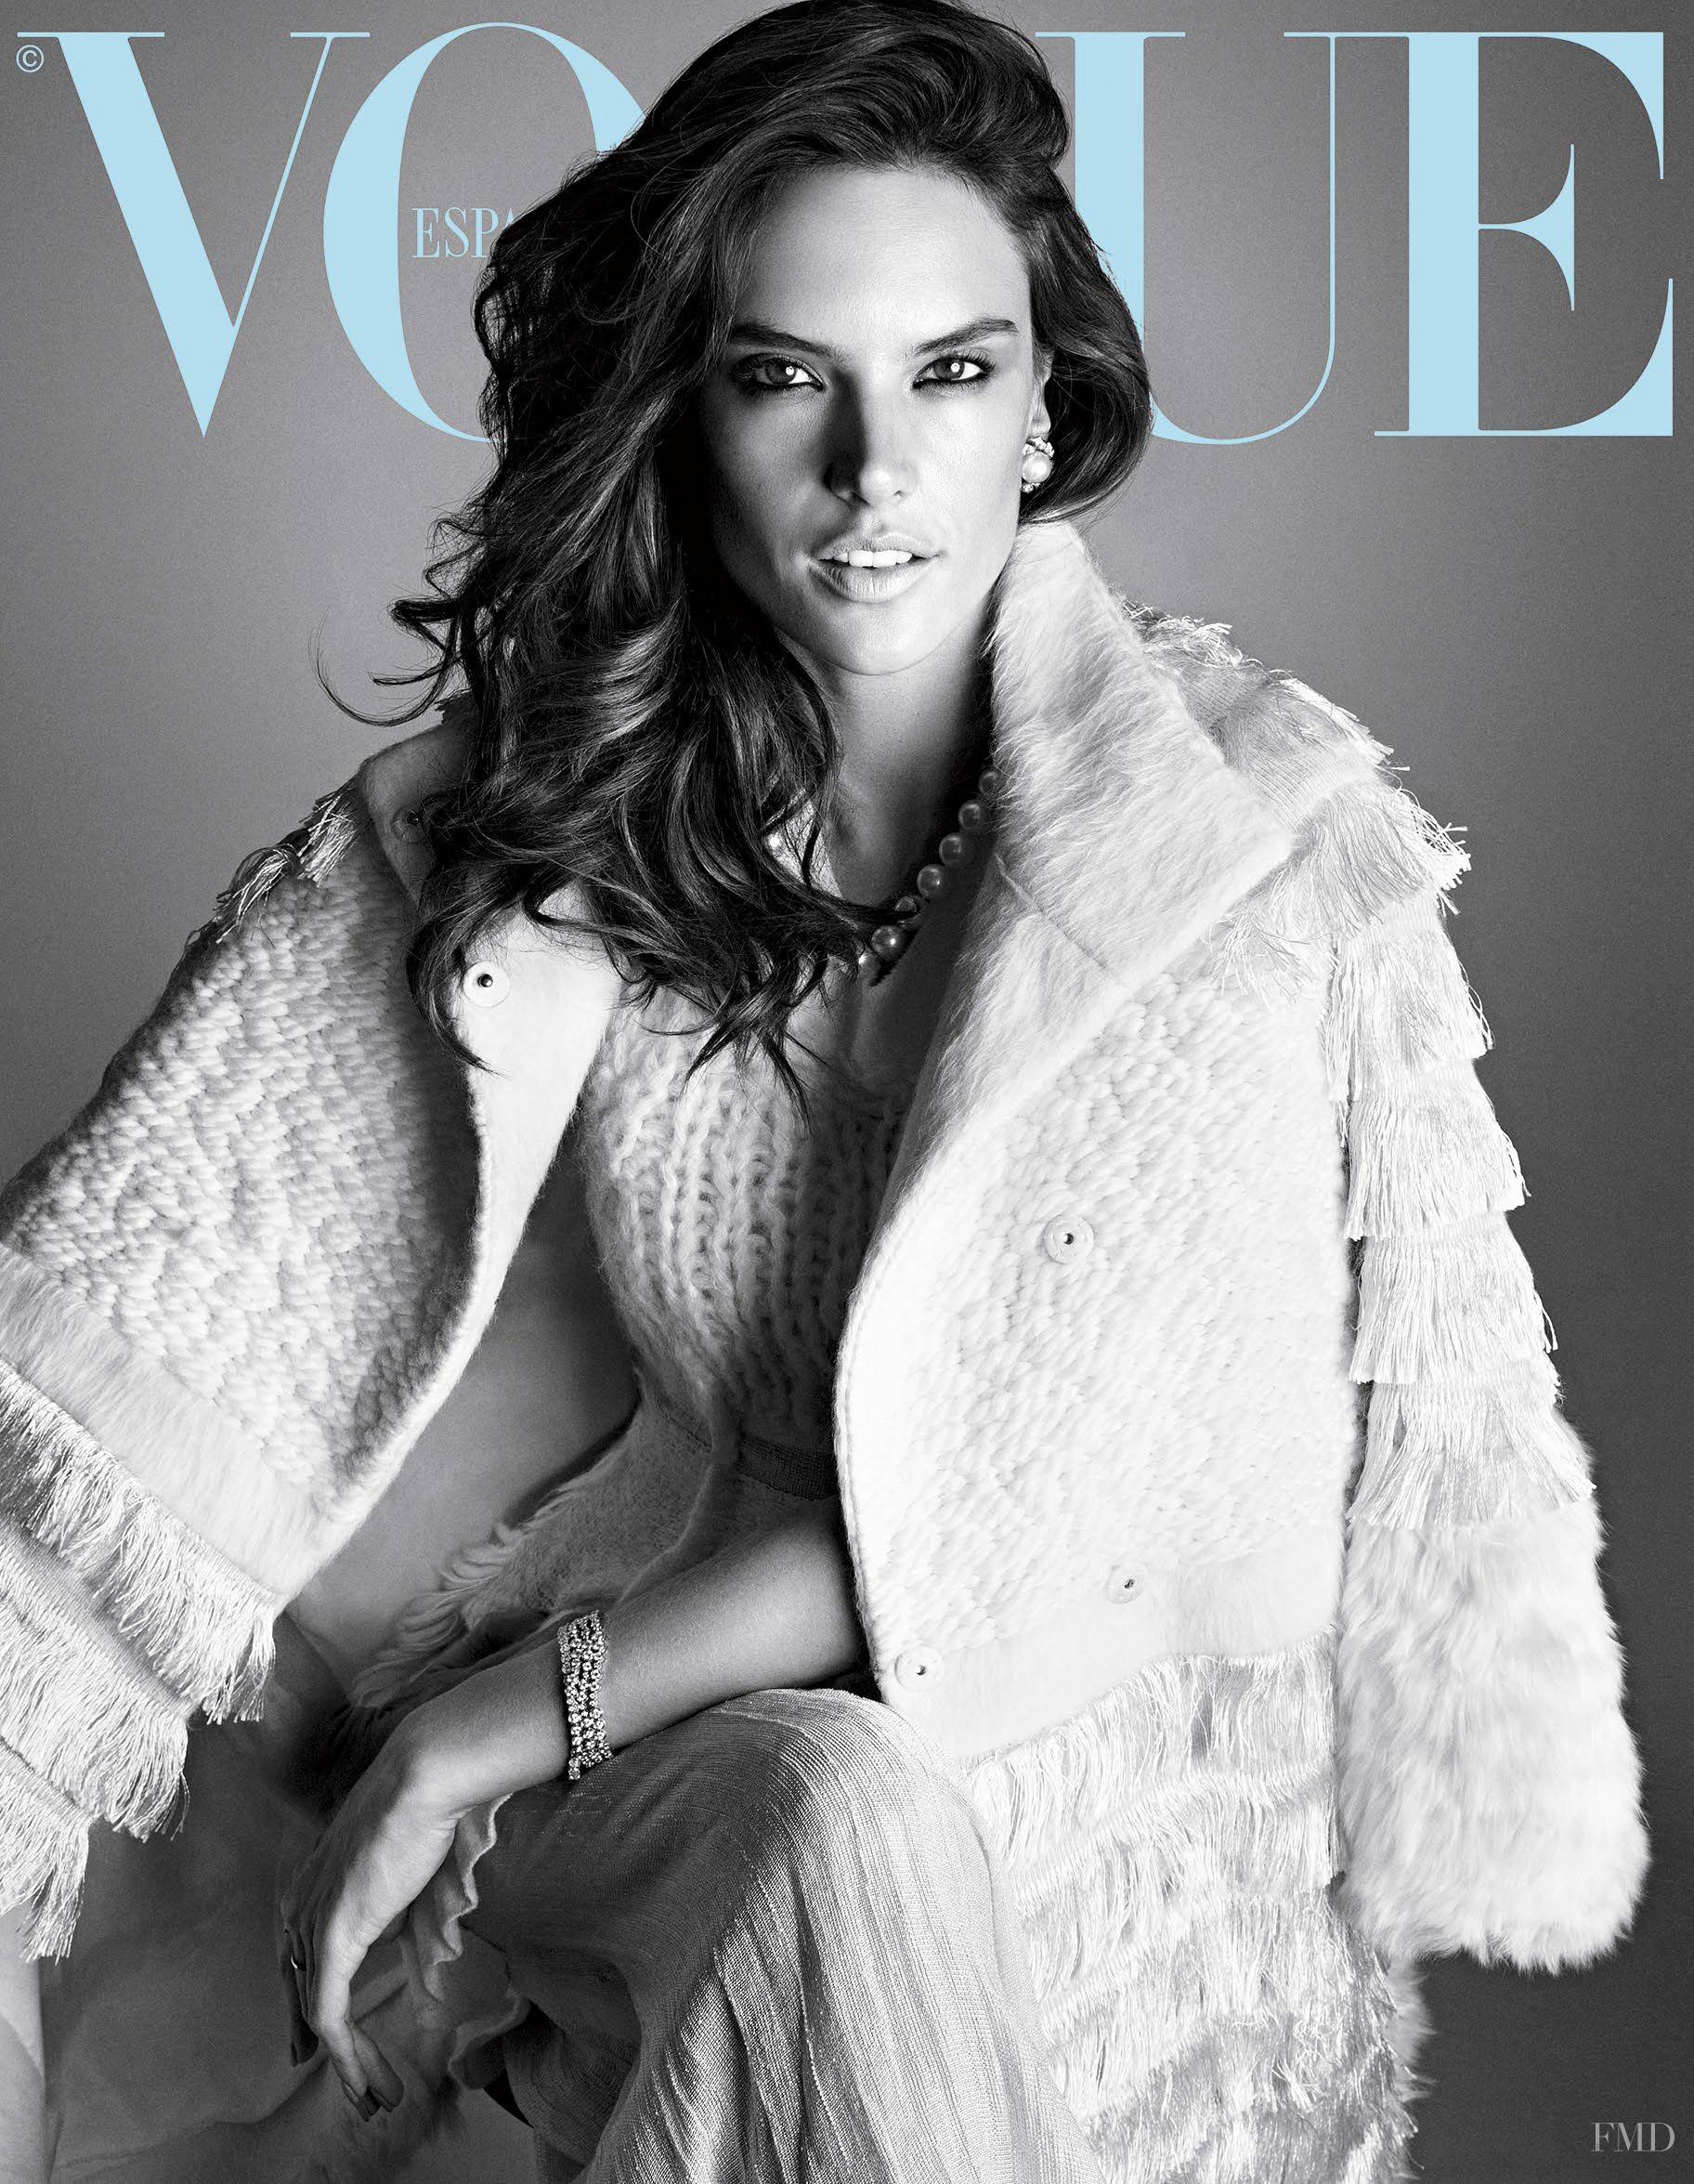 Alessandra Ambrosio featured on the Vogue Spain cover from November 2014.